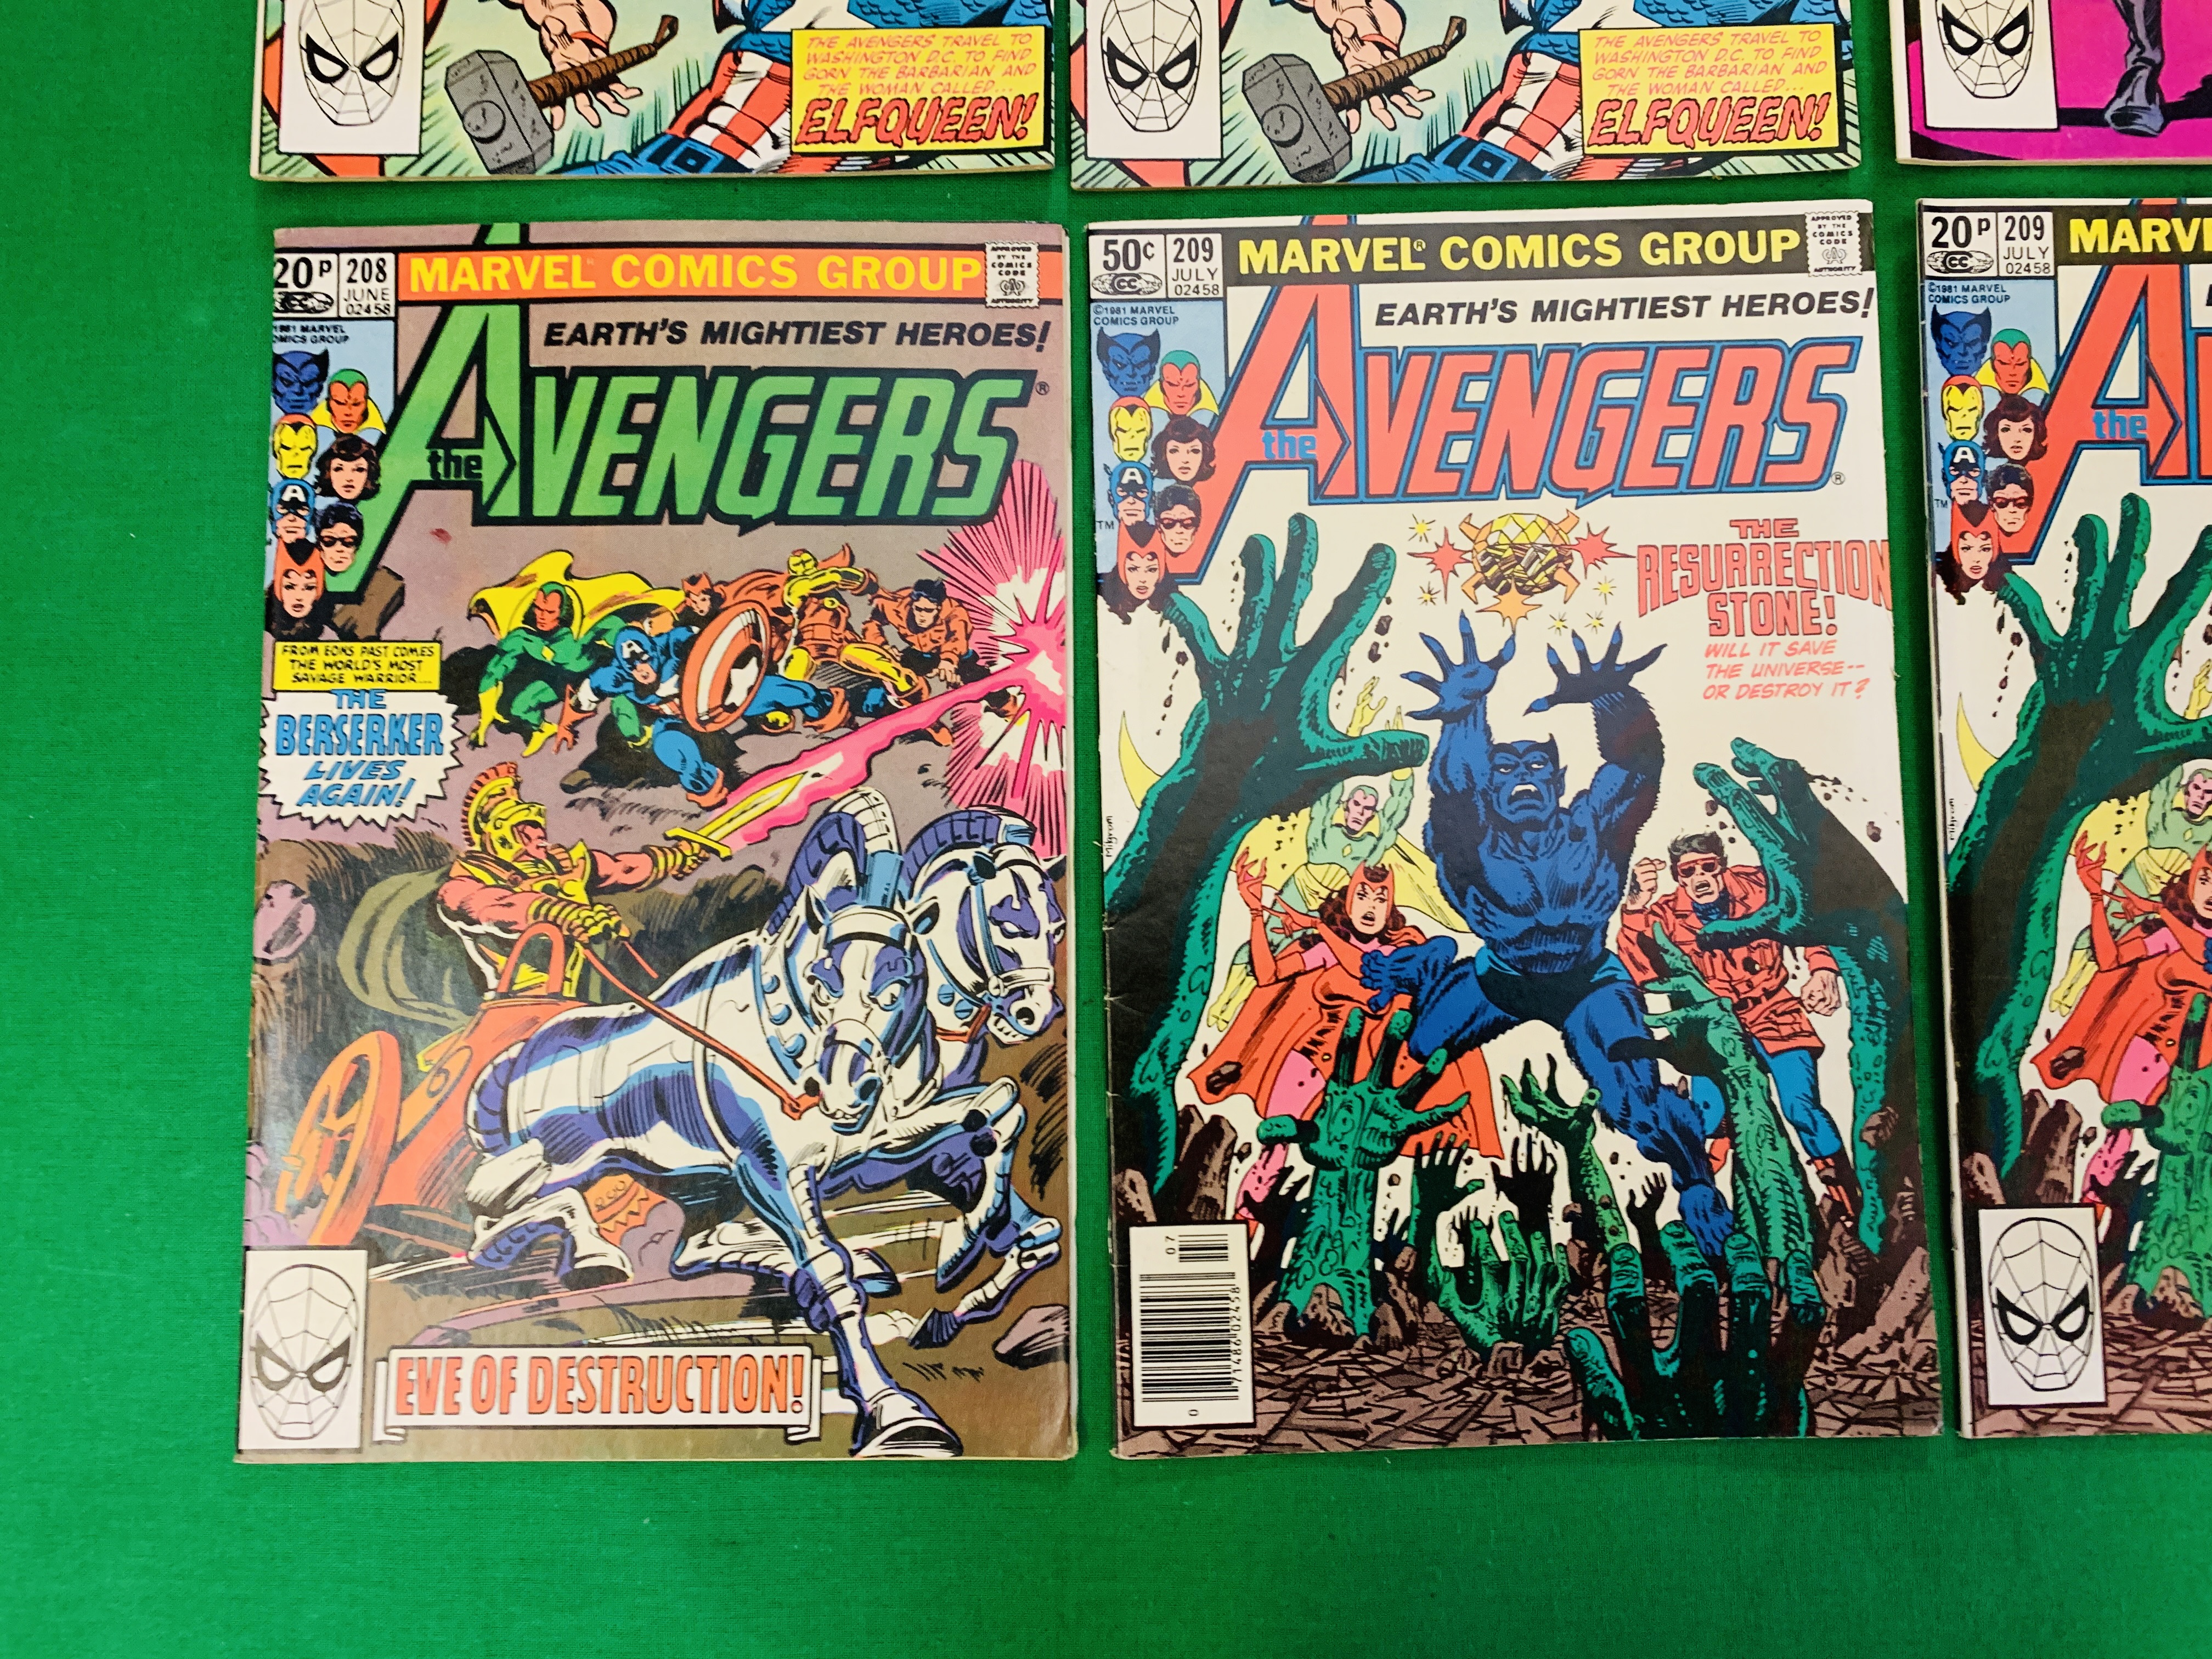 MARVEL COMICS THE AVENGERS NO. 101 - 299, MISSING ISSUES 103 AND 110. - Image 78 of 130